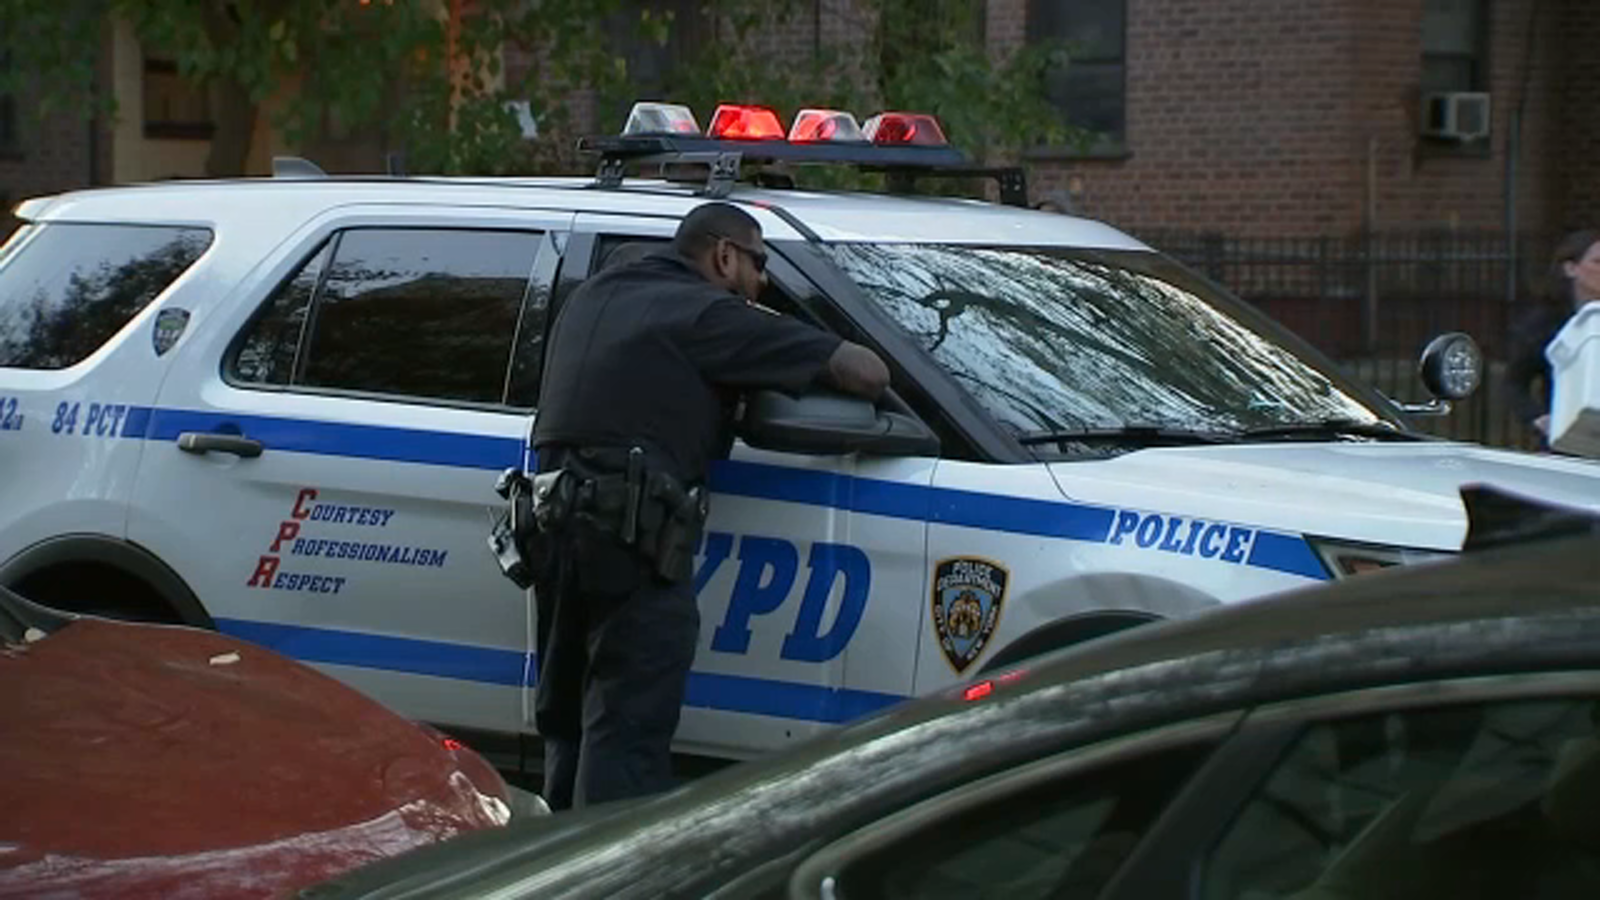 Police investigating double shooting near Barclays Center